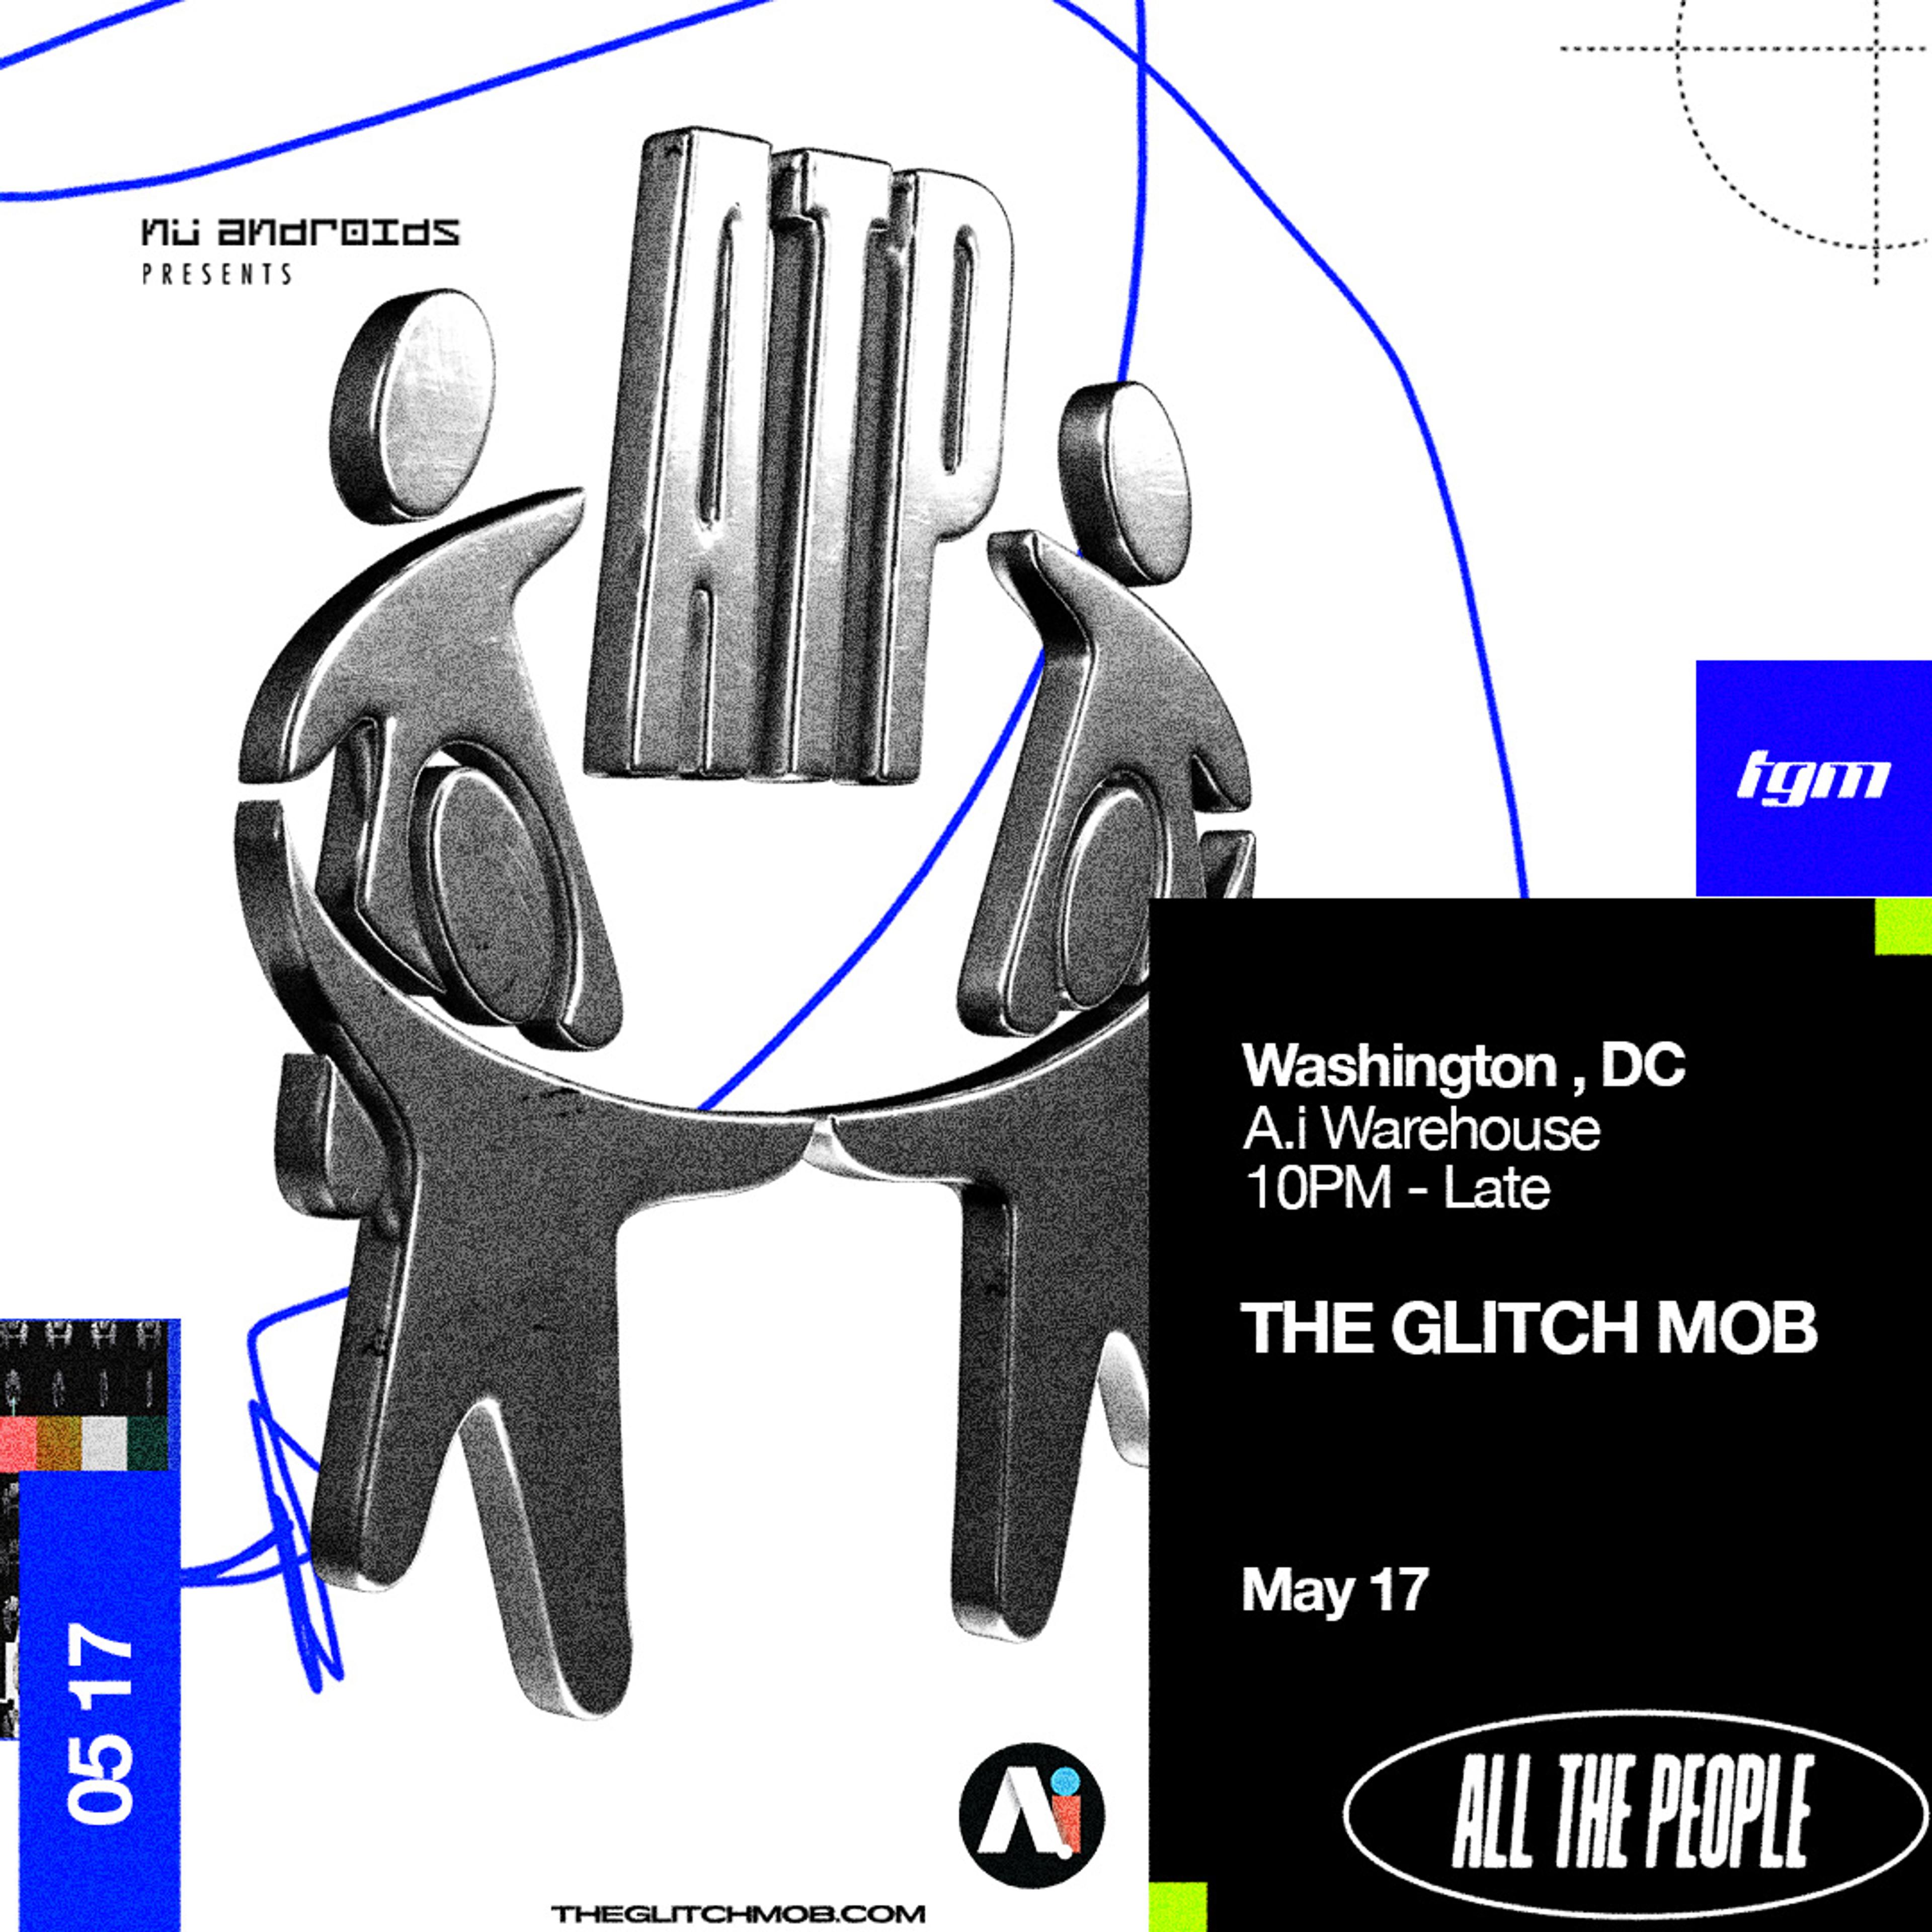 Flyer image for The Glitch Mob